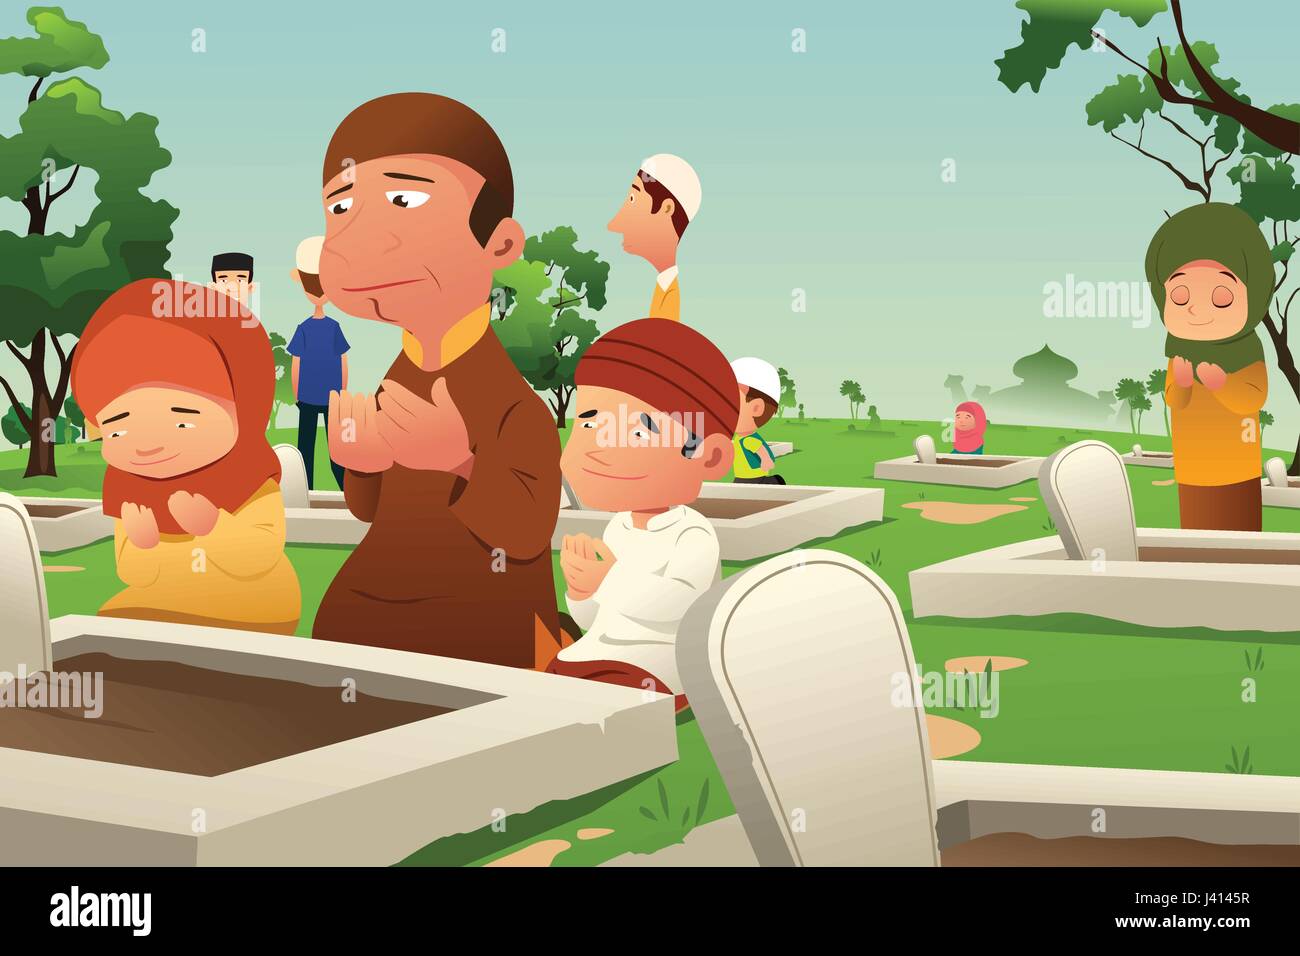 A vector illustration of Muslims Visiting and Praying at Cemetery Stock Vector